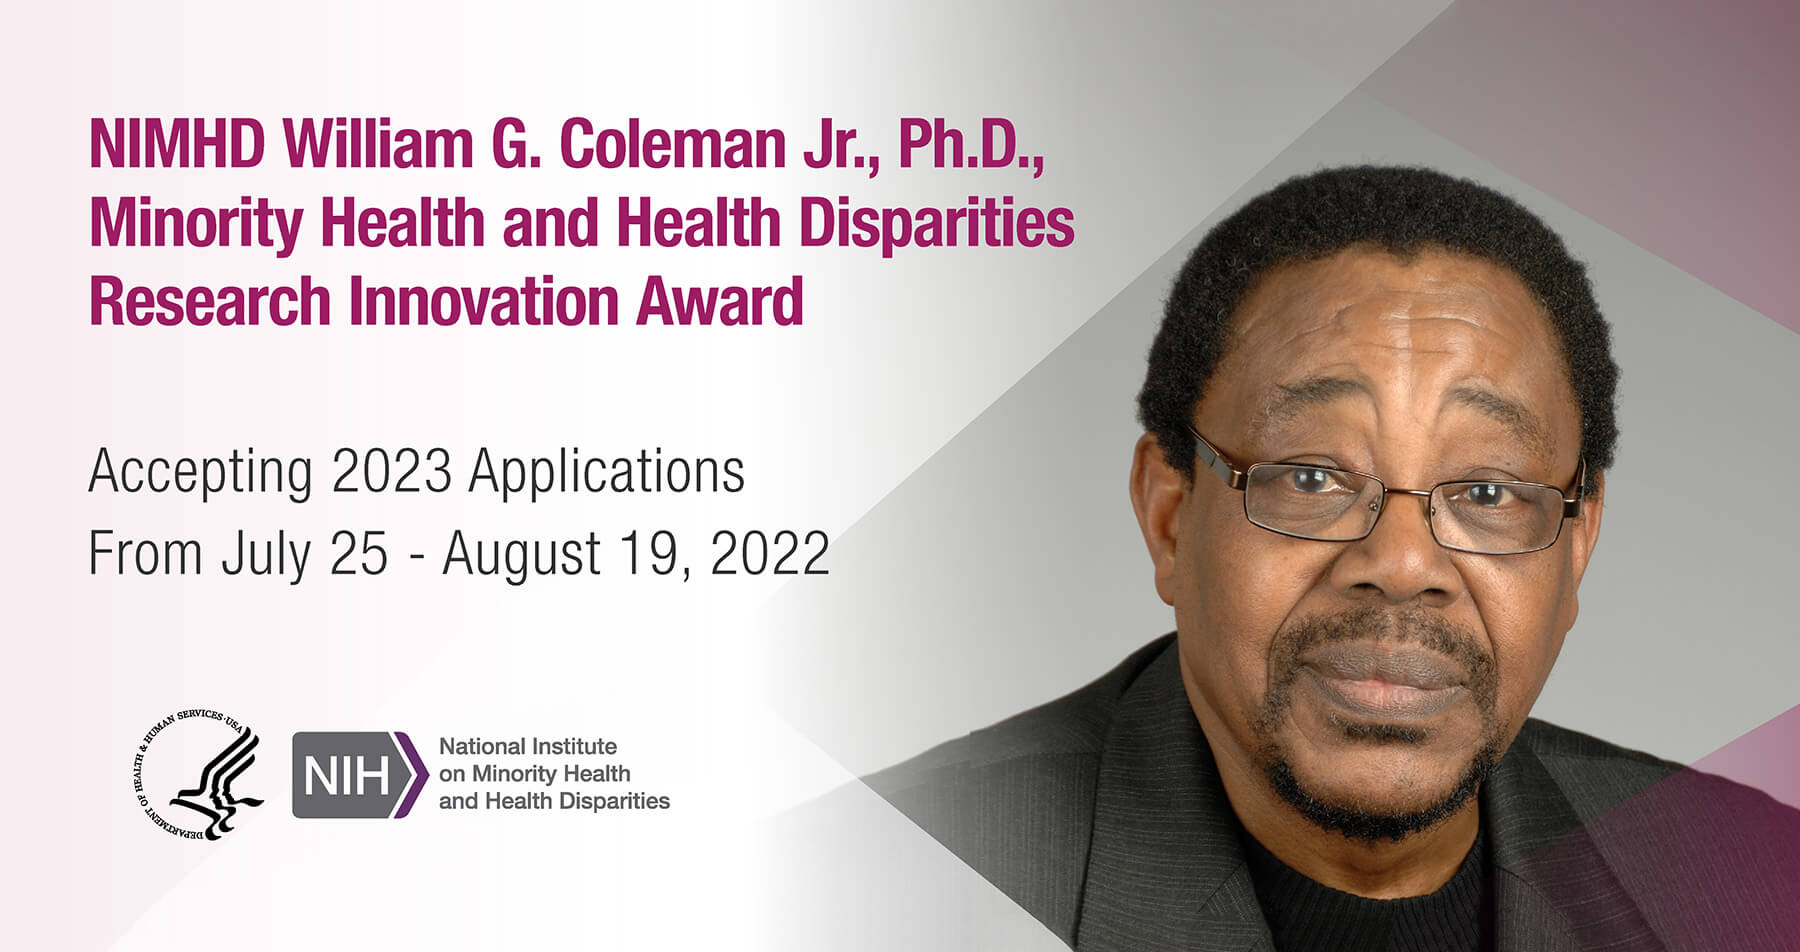 2023 NIMHD William G. Coleman Jr., Ph.D., Minority Health and Health Disparities Research Innovation Award - Apply by August 19, 2022